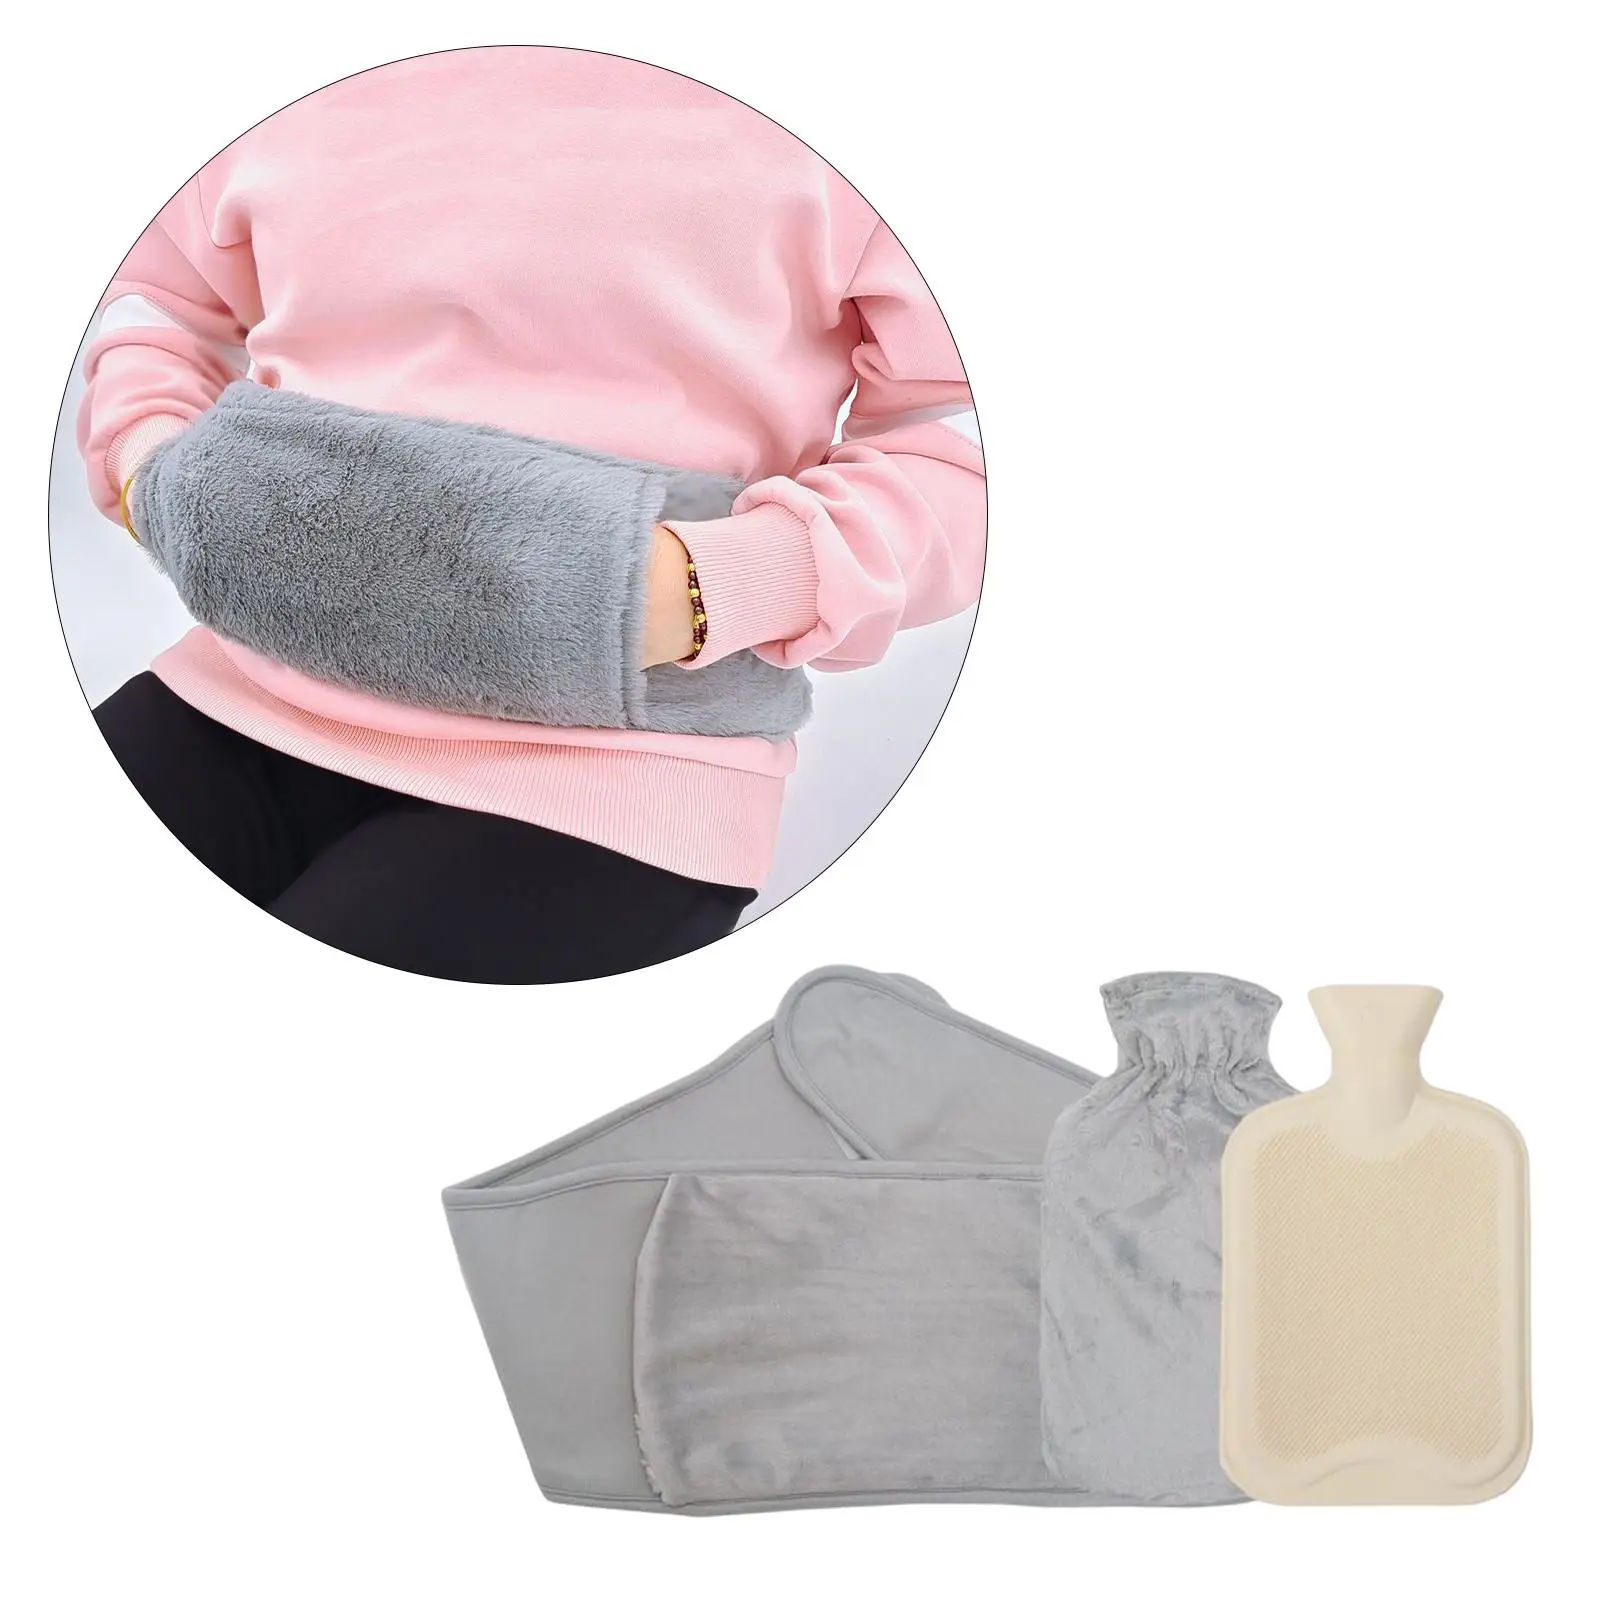 Hot Water Bottle with Soft Waist Cover Portable Hands Free Easy to Use Thickened for Neck